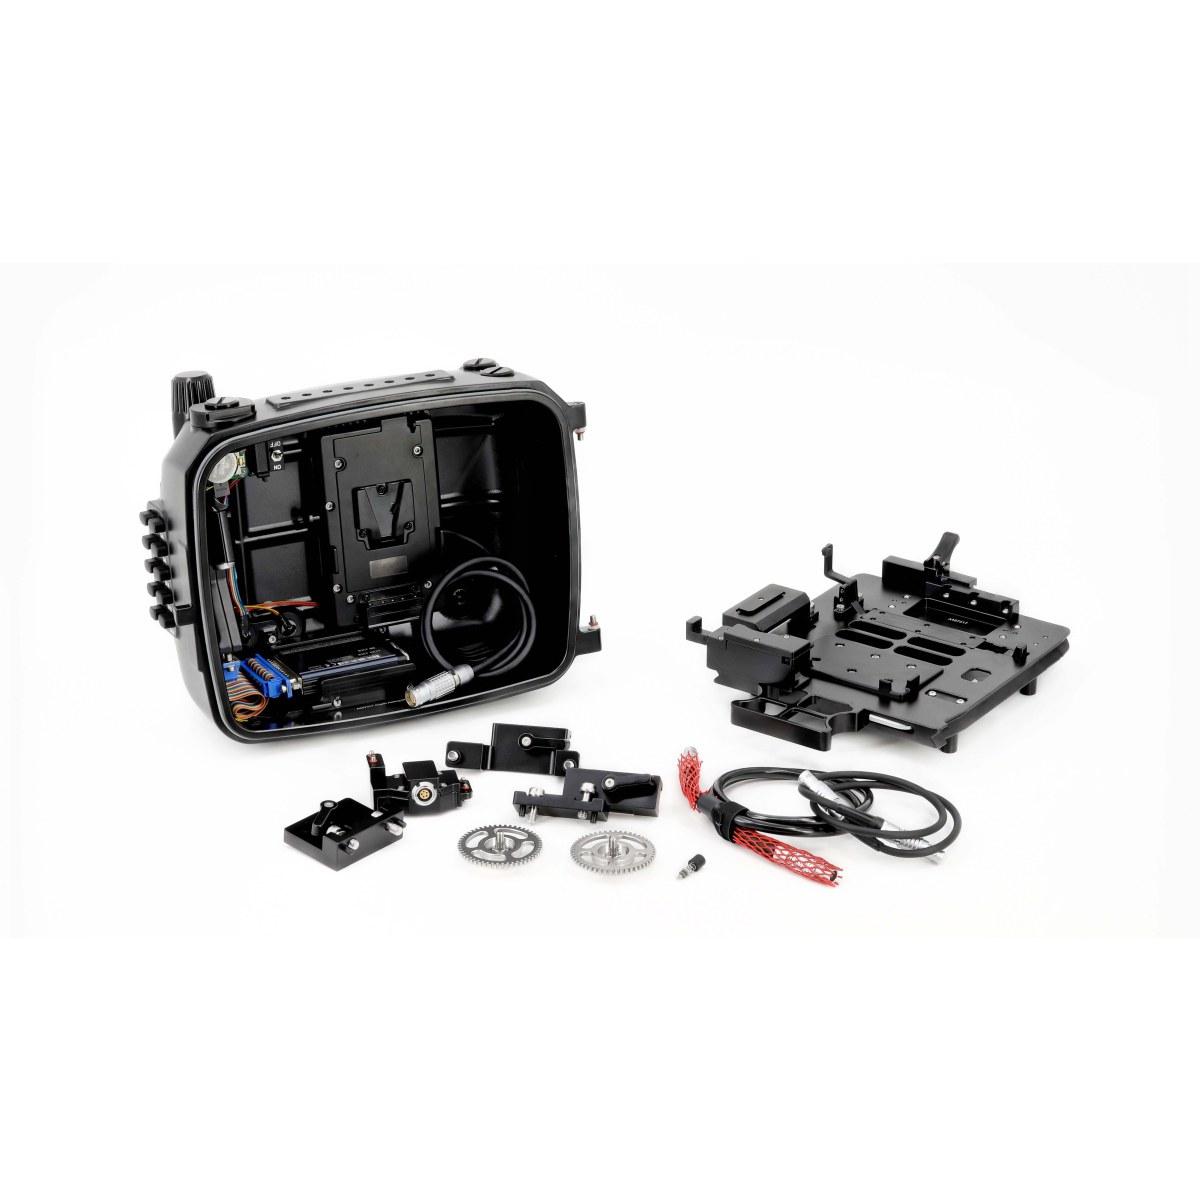 Upgrade System for ARRI ALEXA Mini LF Camera to use with 16133 (incl. a new rear housing, ARRI General Purpose IO Box GPB-1, camera tray and a conversion kit for mounting brackets)